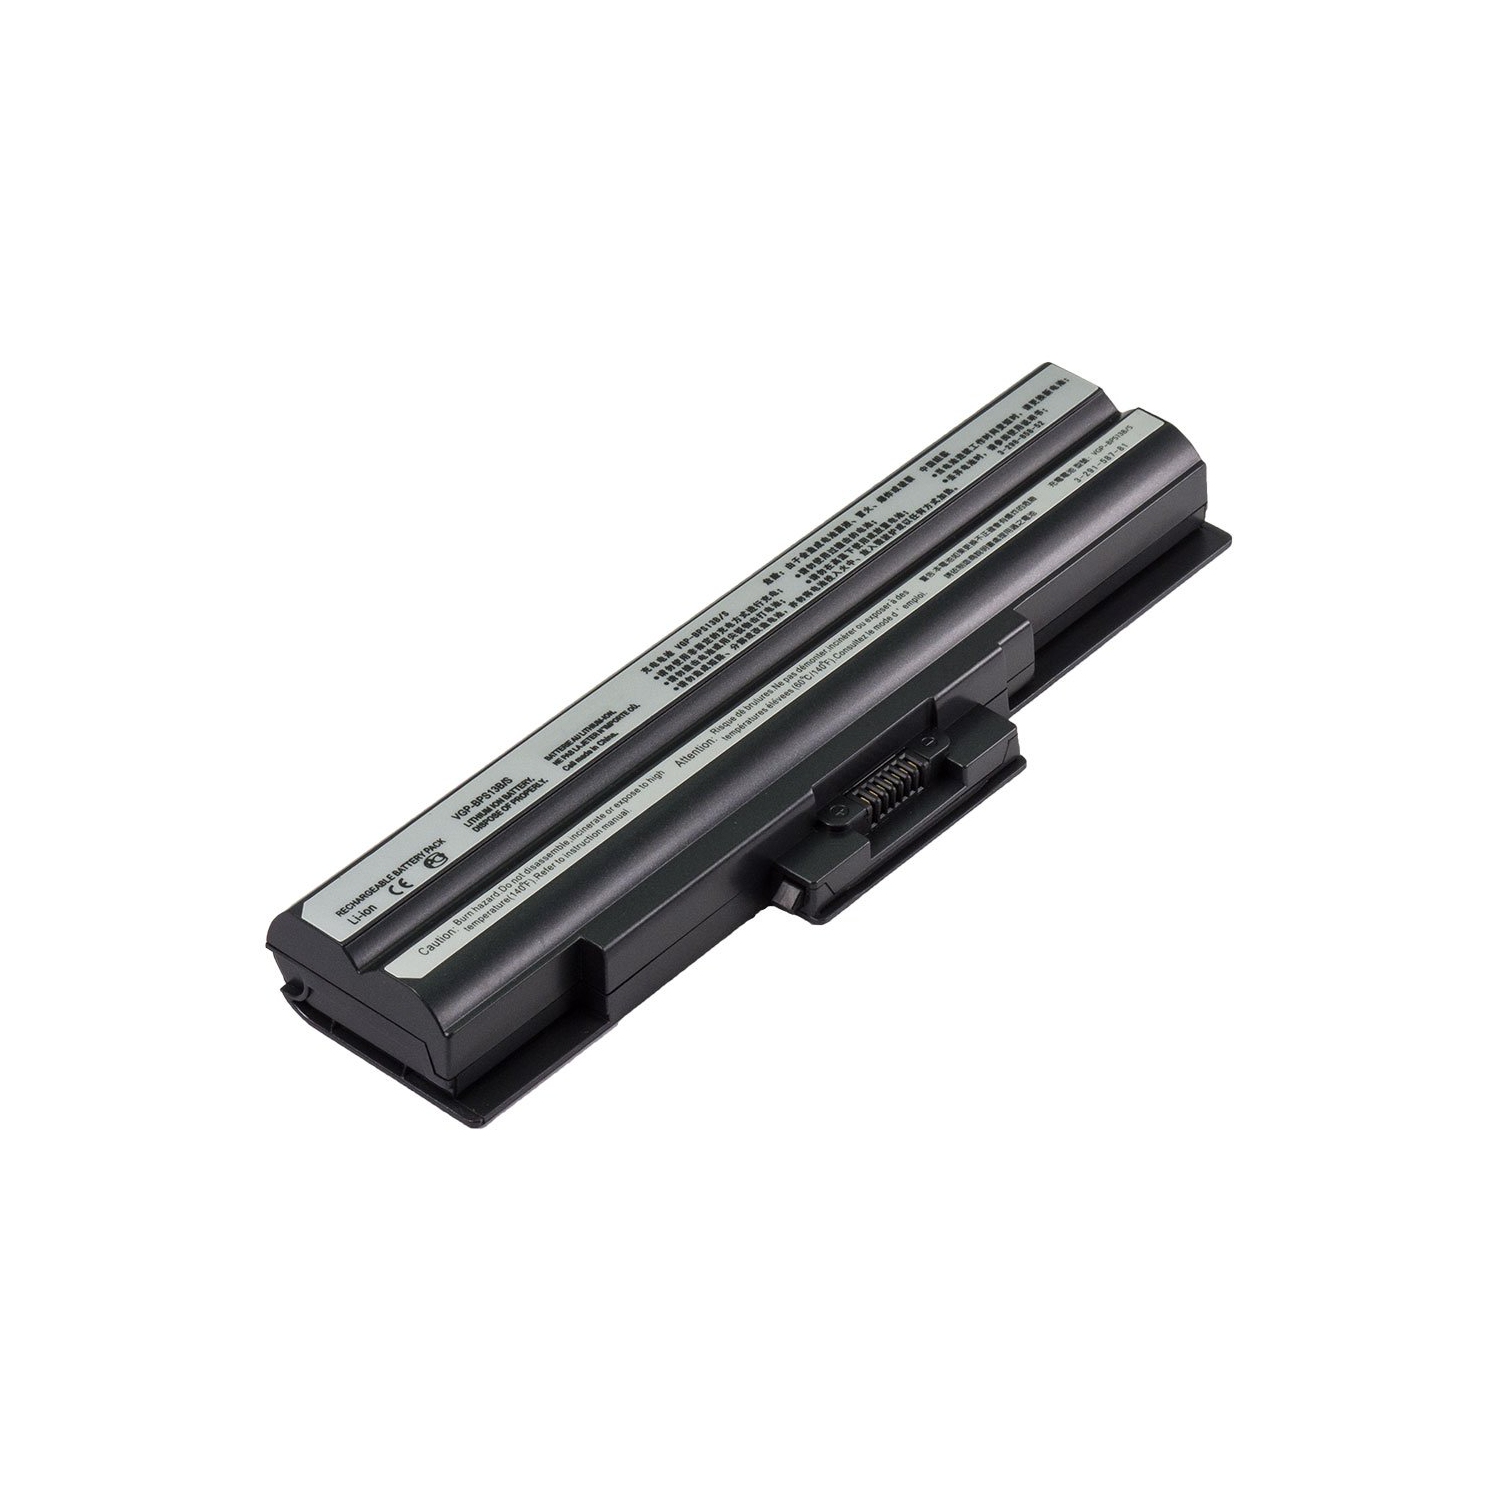 Laptop Battery Replacement for Sony VAIO VGN-BZ563P23, VGP-BPL13, VGP-BPS13/Q, VGP-BPS13A/B, VGP-BPS13A/S, VGP-BPS13A